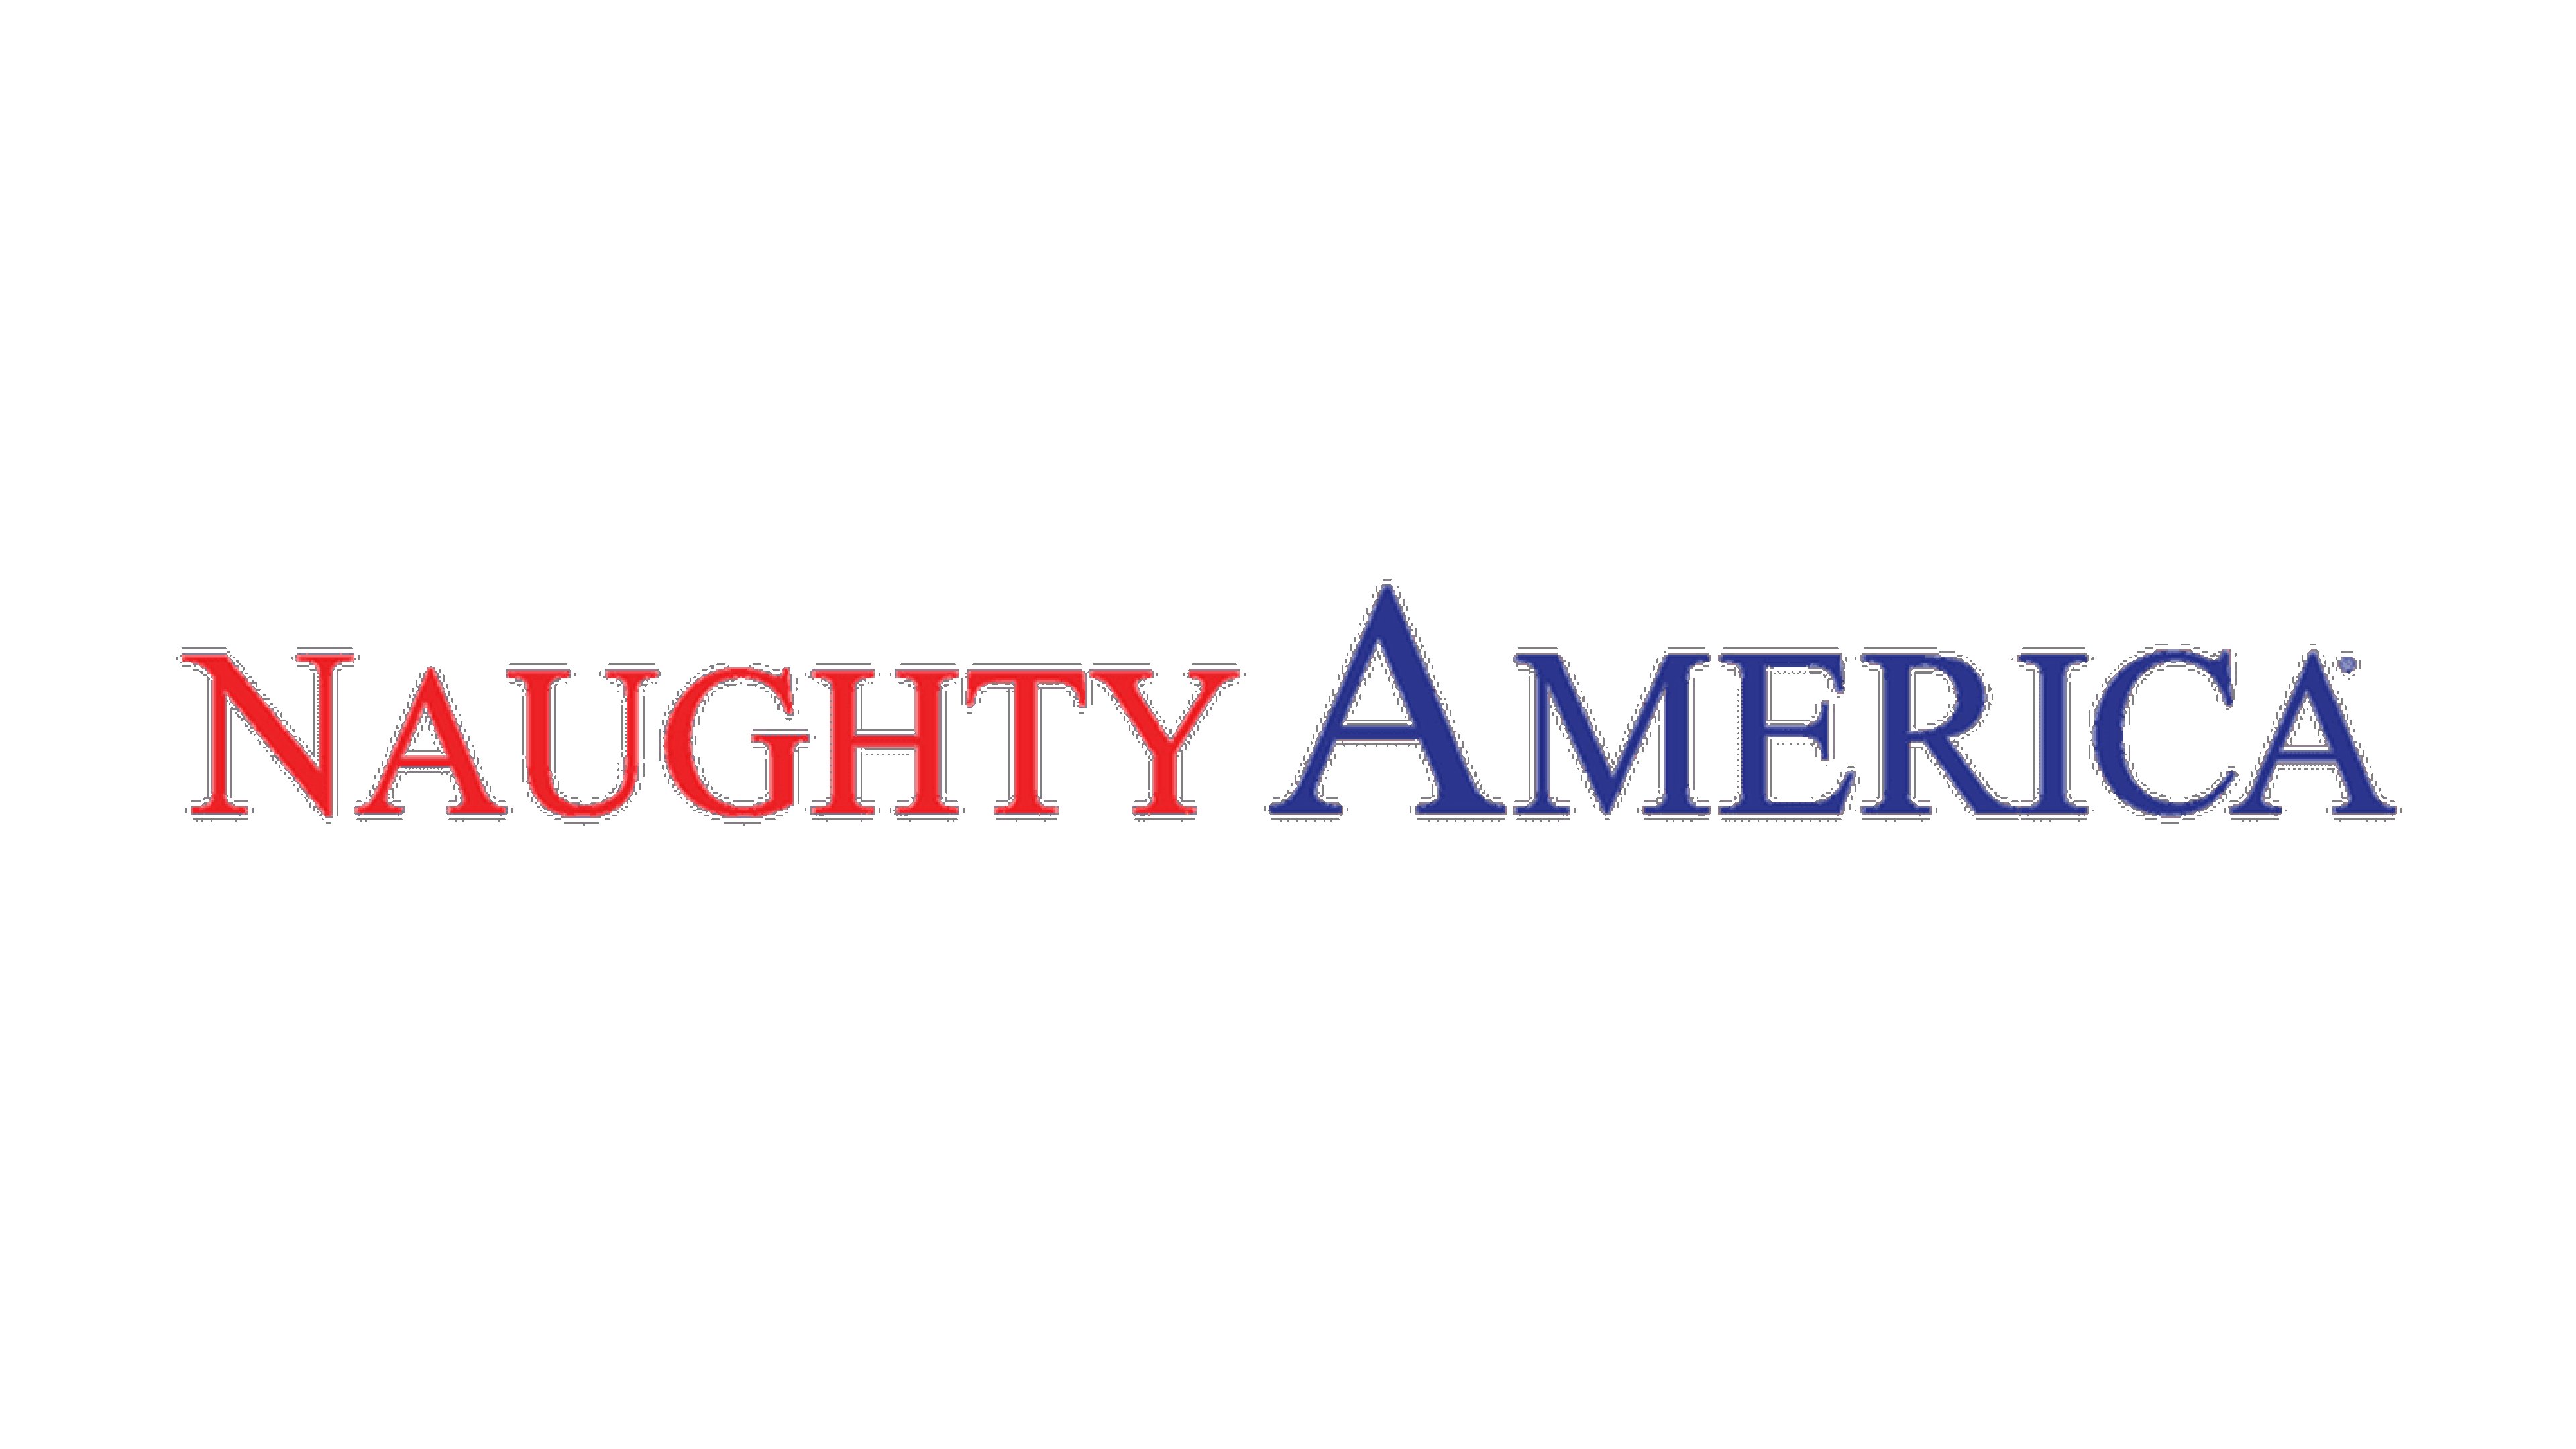 Noughtyamerican - NaughtyAmerica Logo and symbol, meaning, history, PNG, new